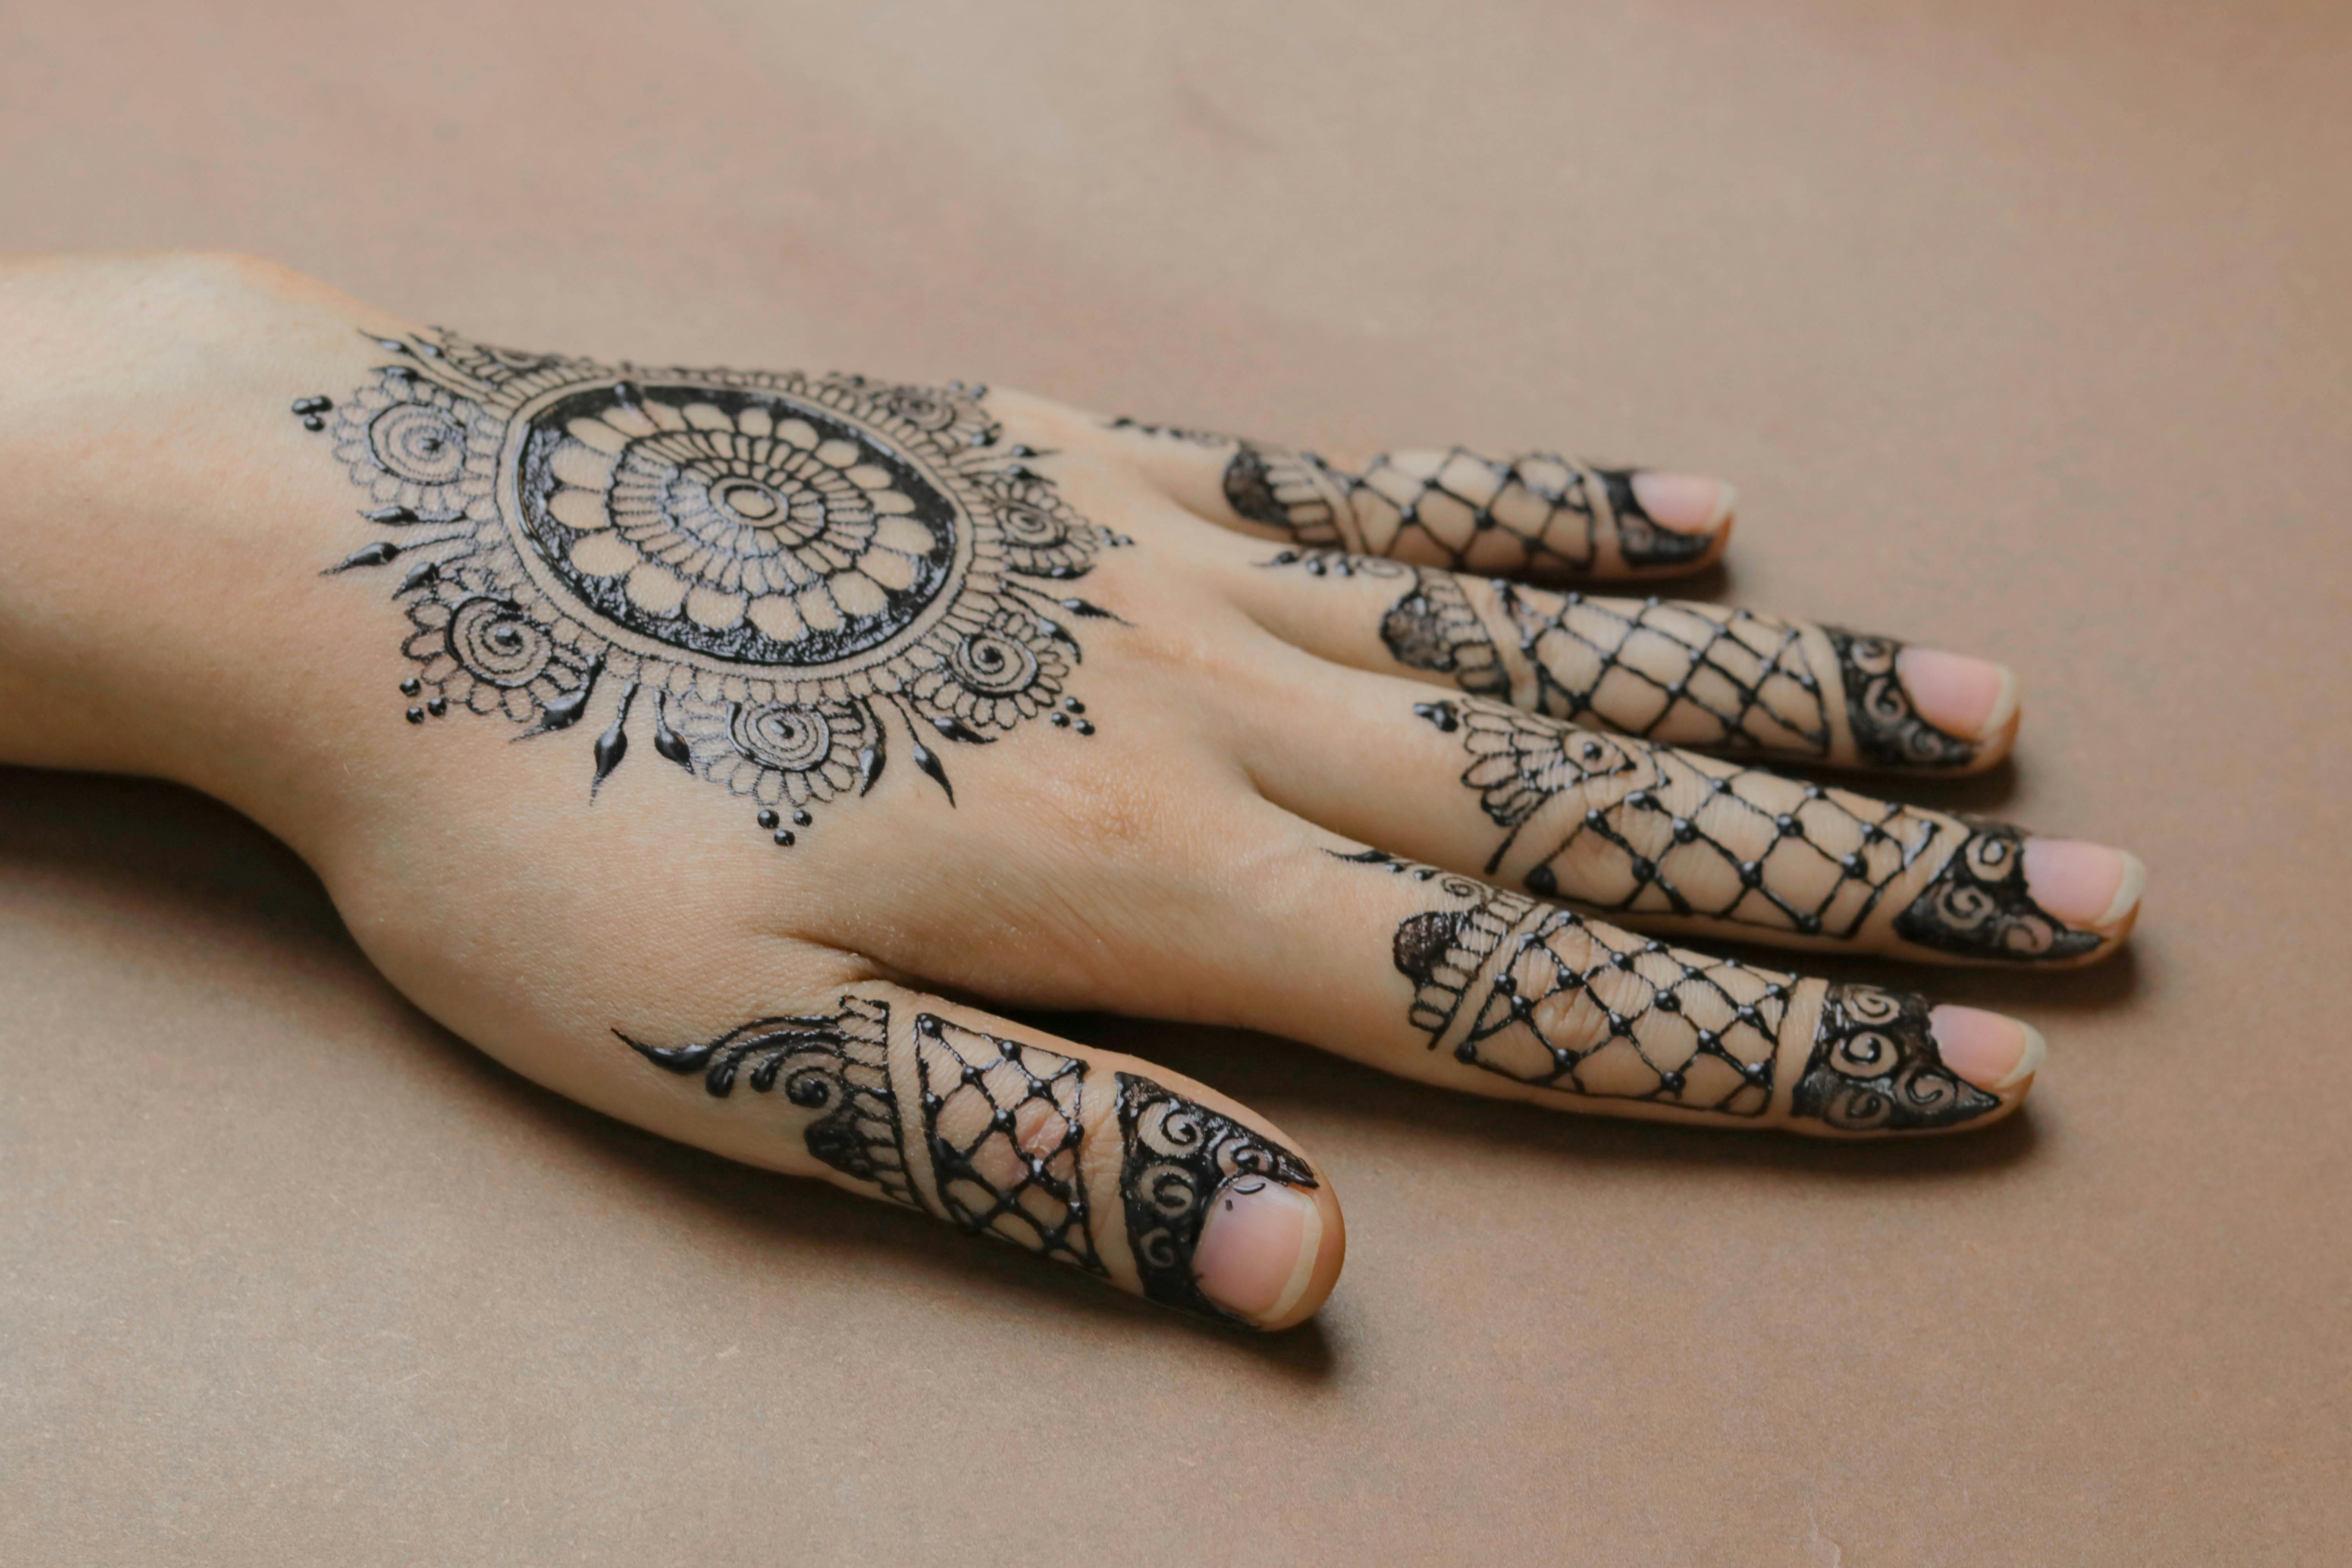 Henna Tattoo on Hand of Woman Holding Ring · Free Stock Photo